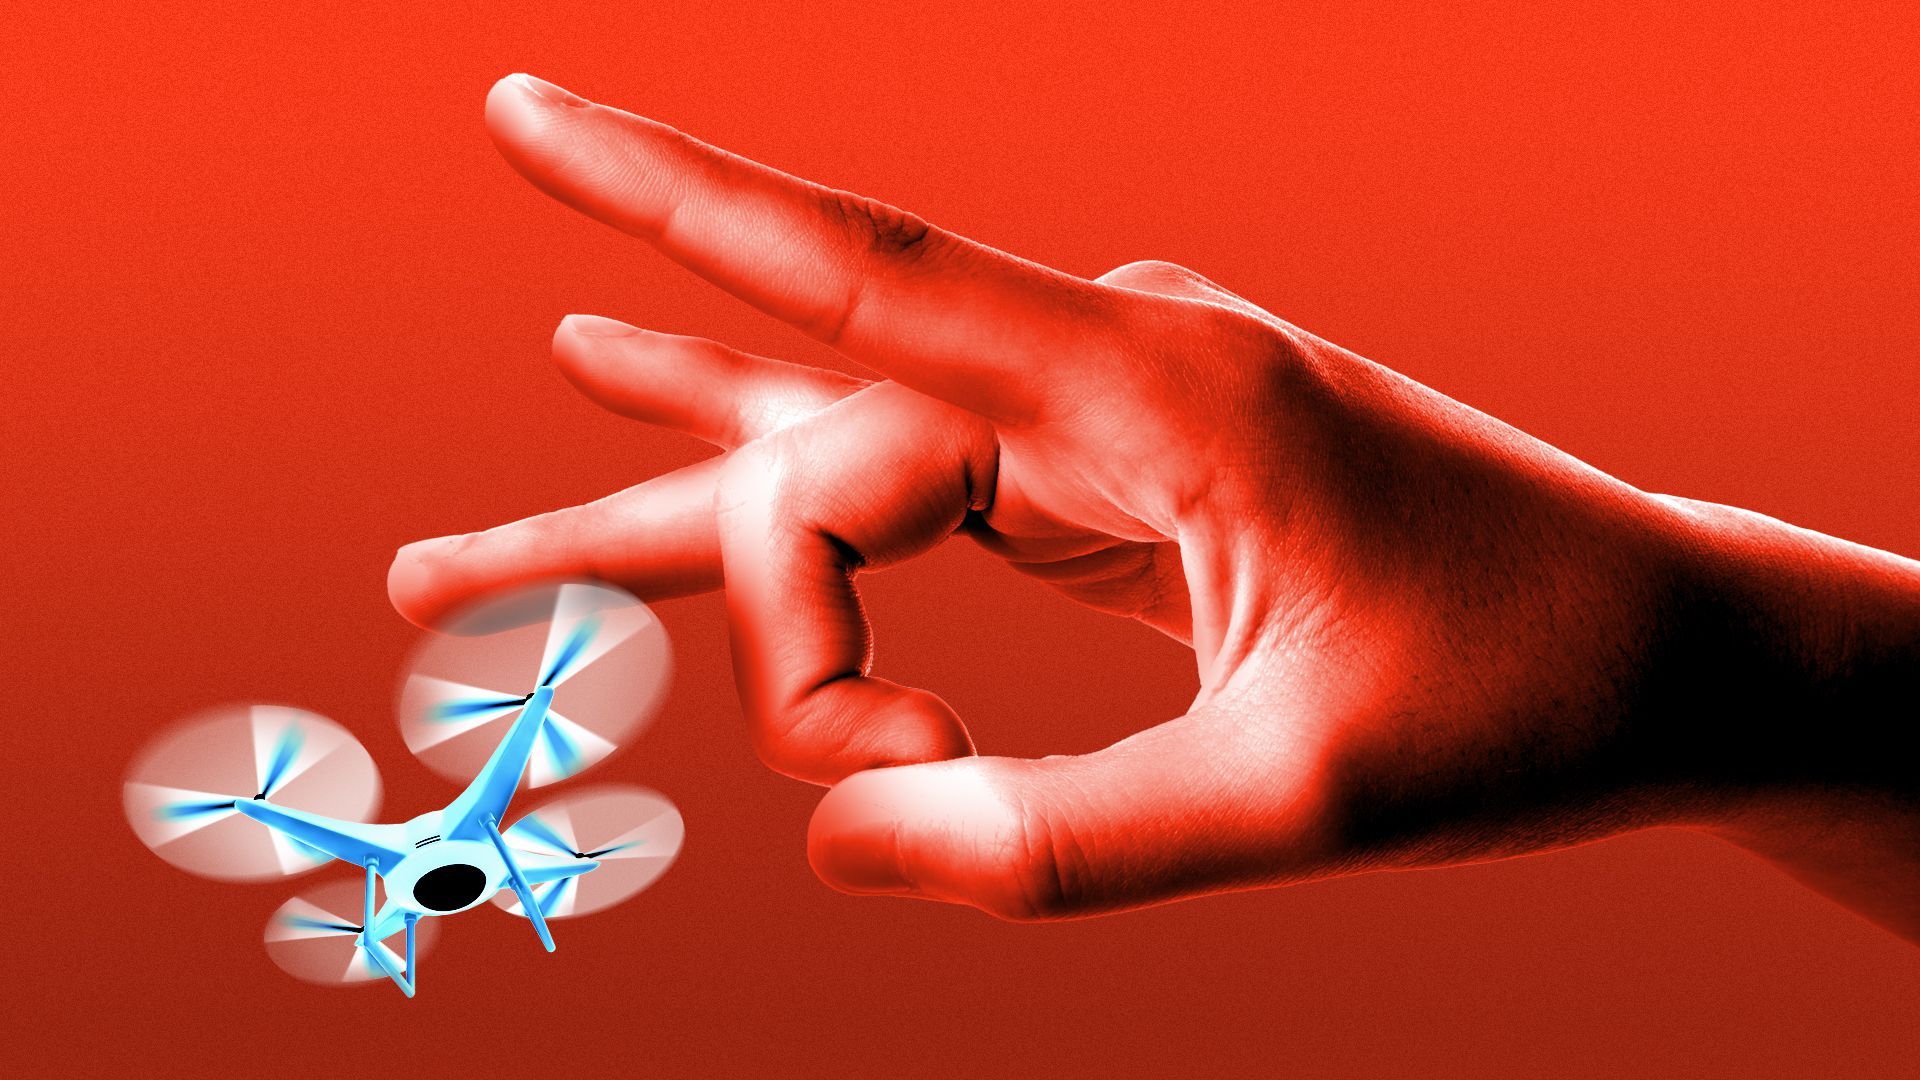 Illustration of a giant hand preparing to flick a tiny drone